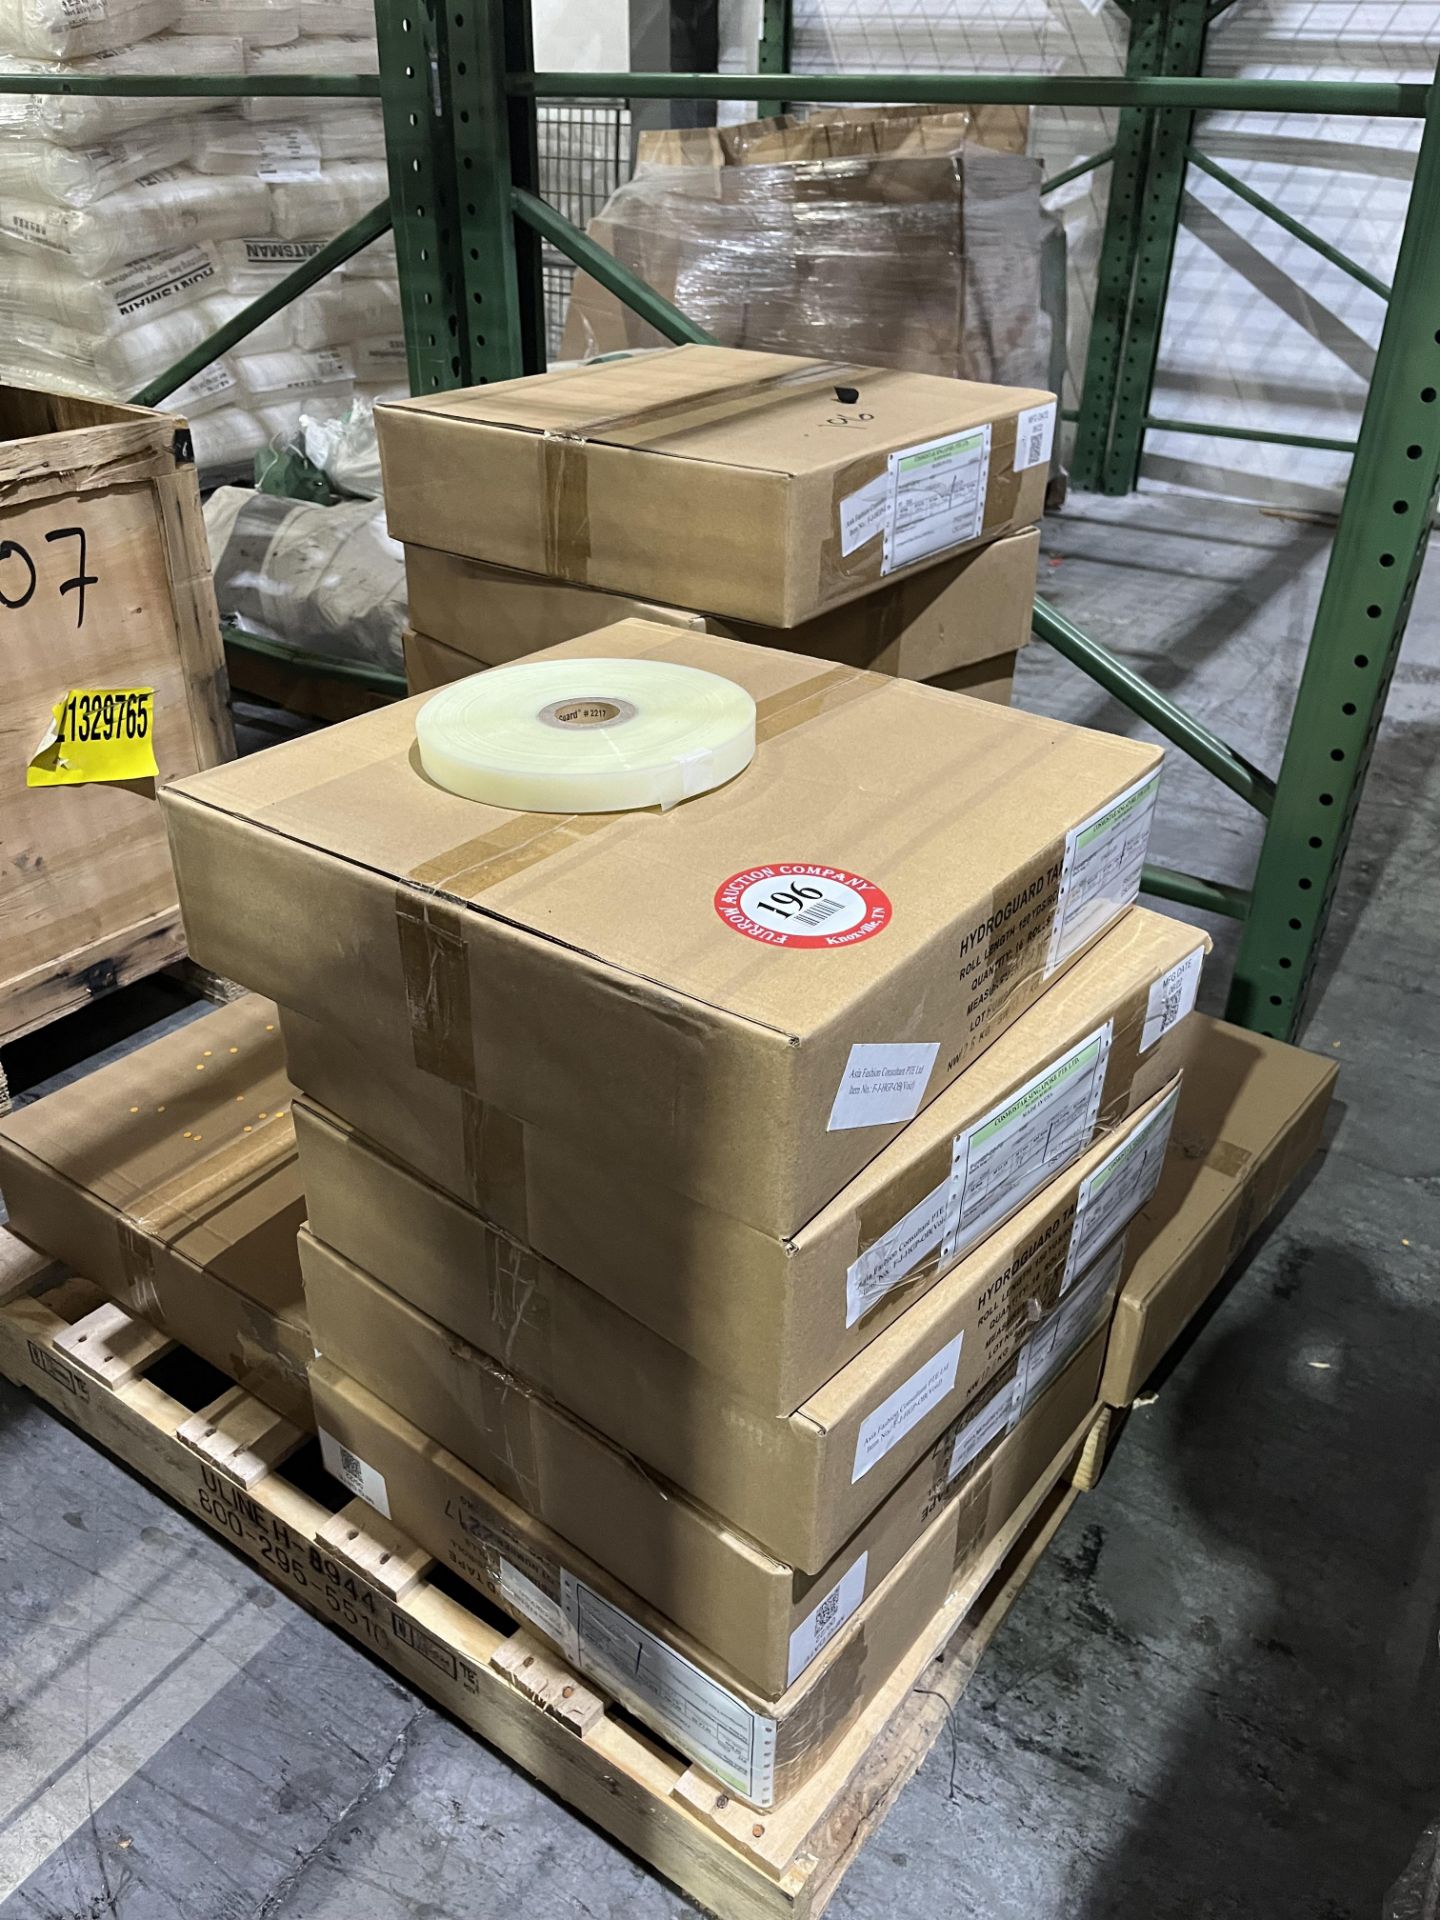 (13) Boxes of 23mm hydroguard tape